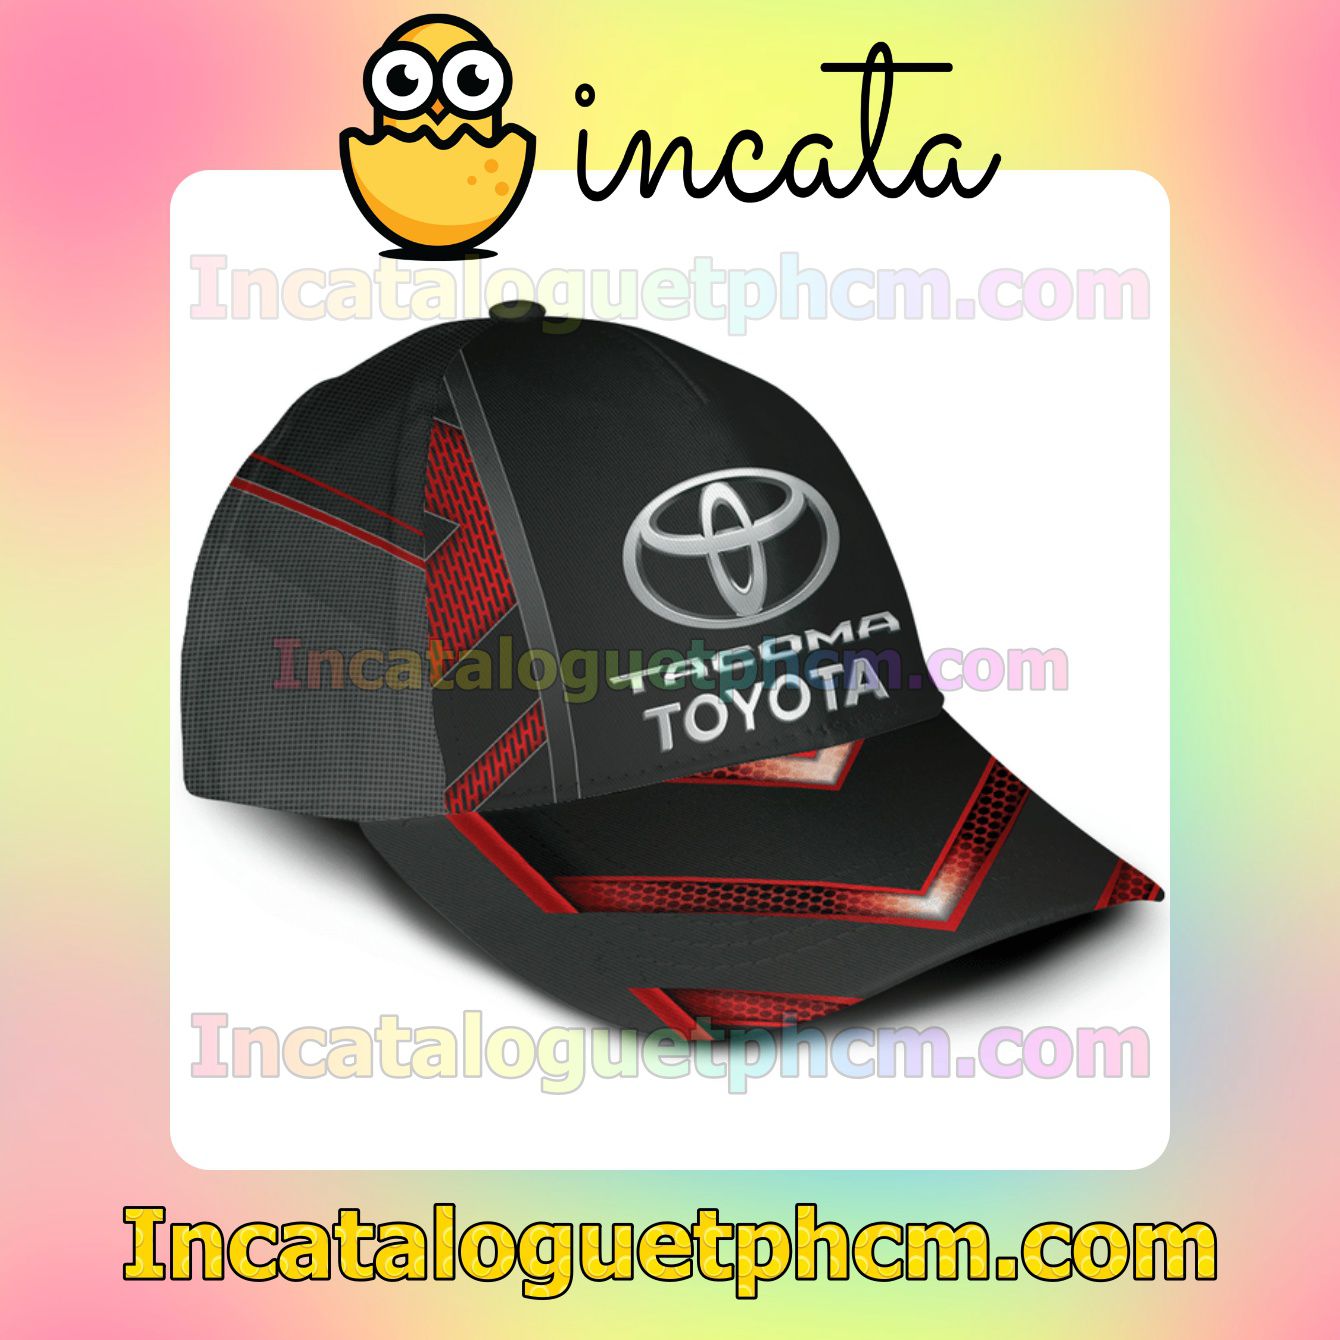 Get Here Toyota Tacoma Black And Red Classic Hat Caps Gift For Men